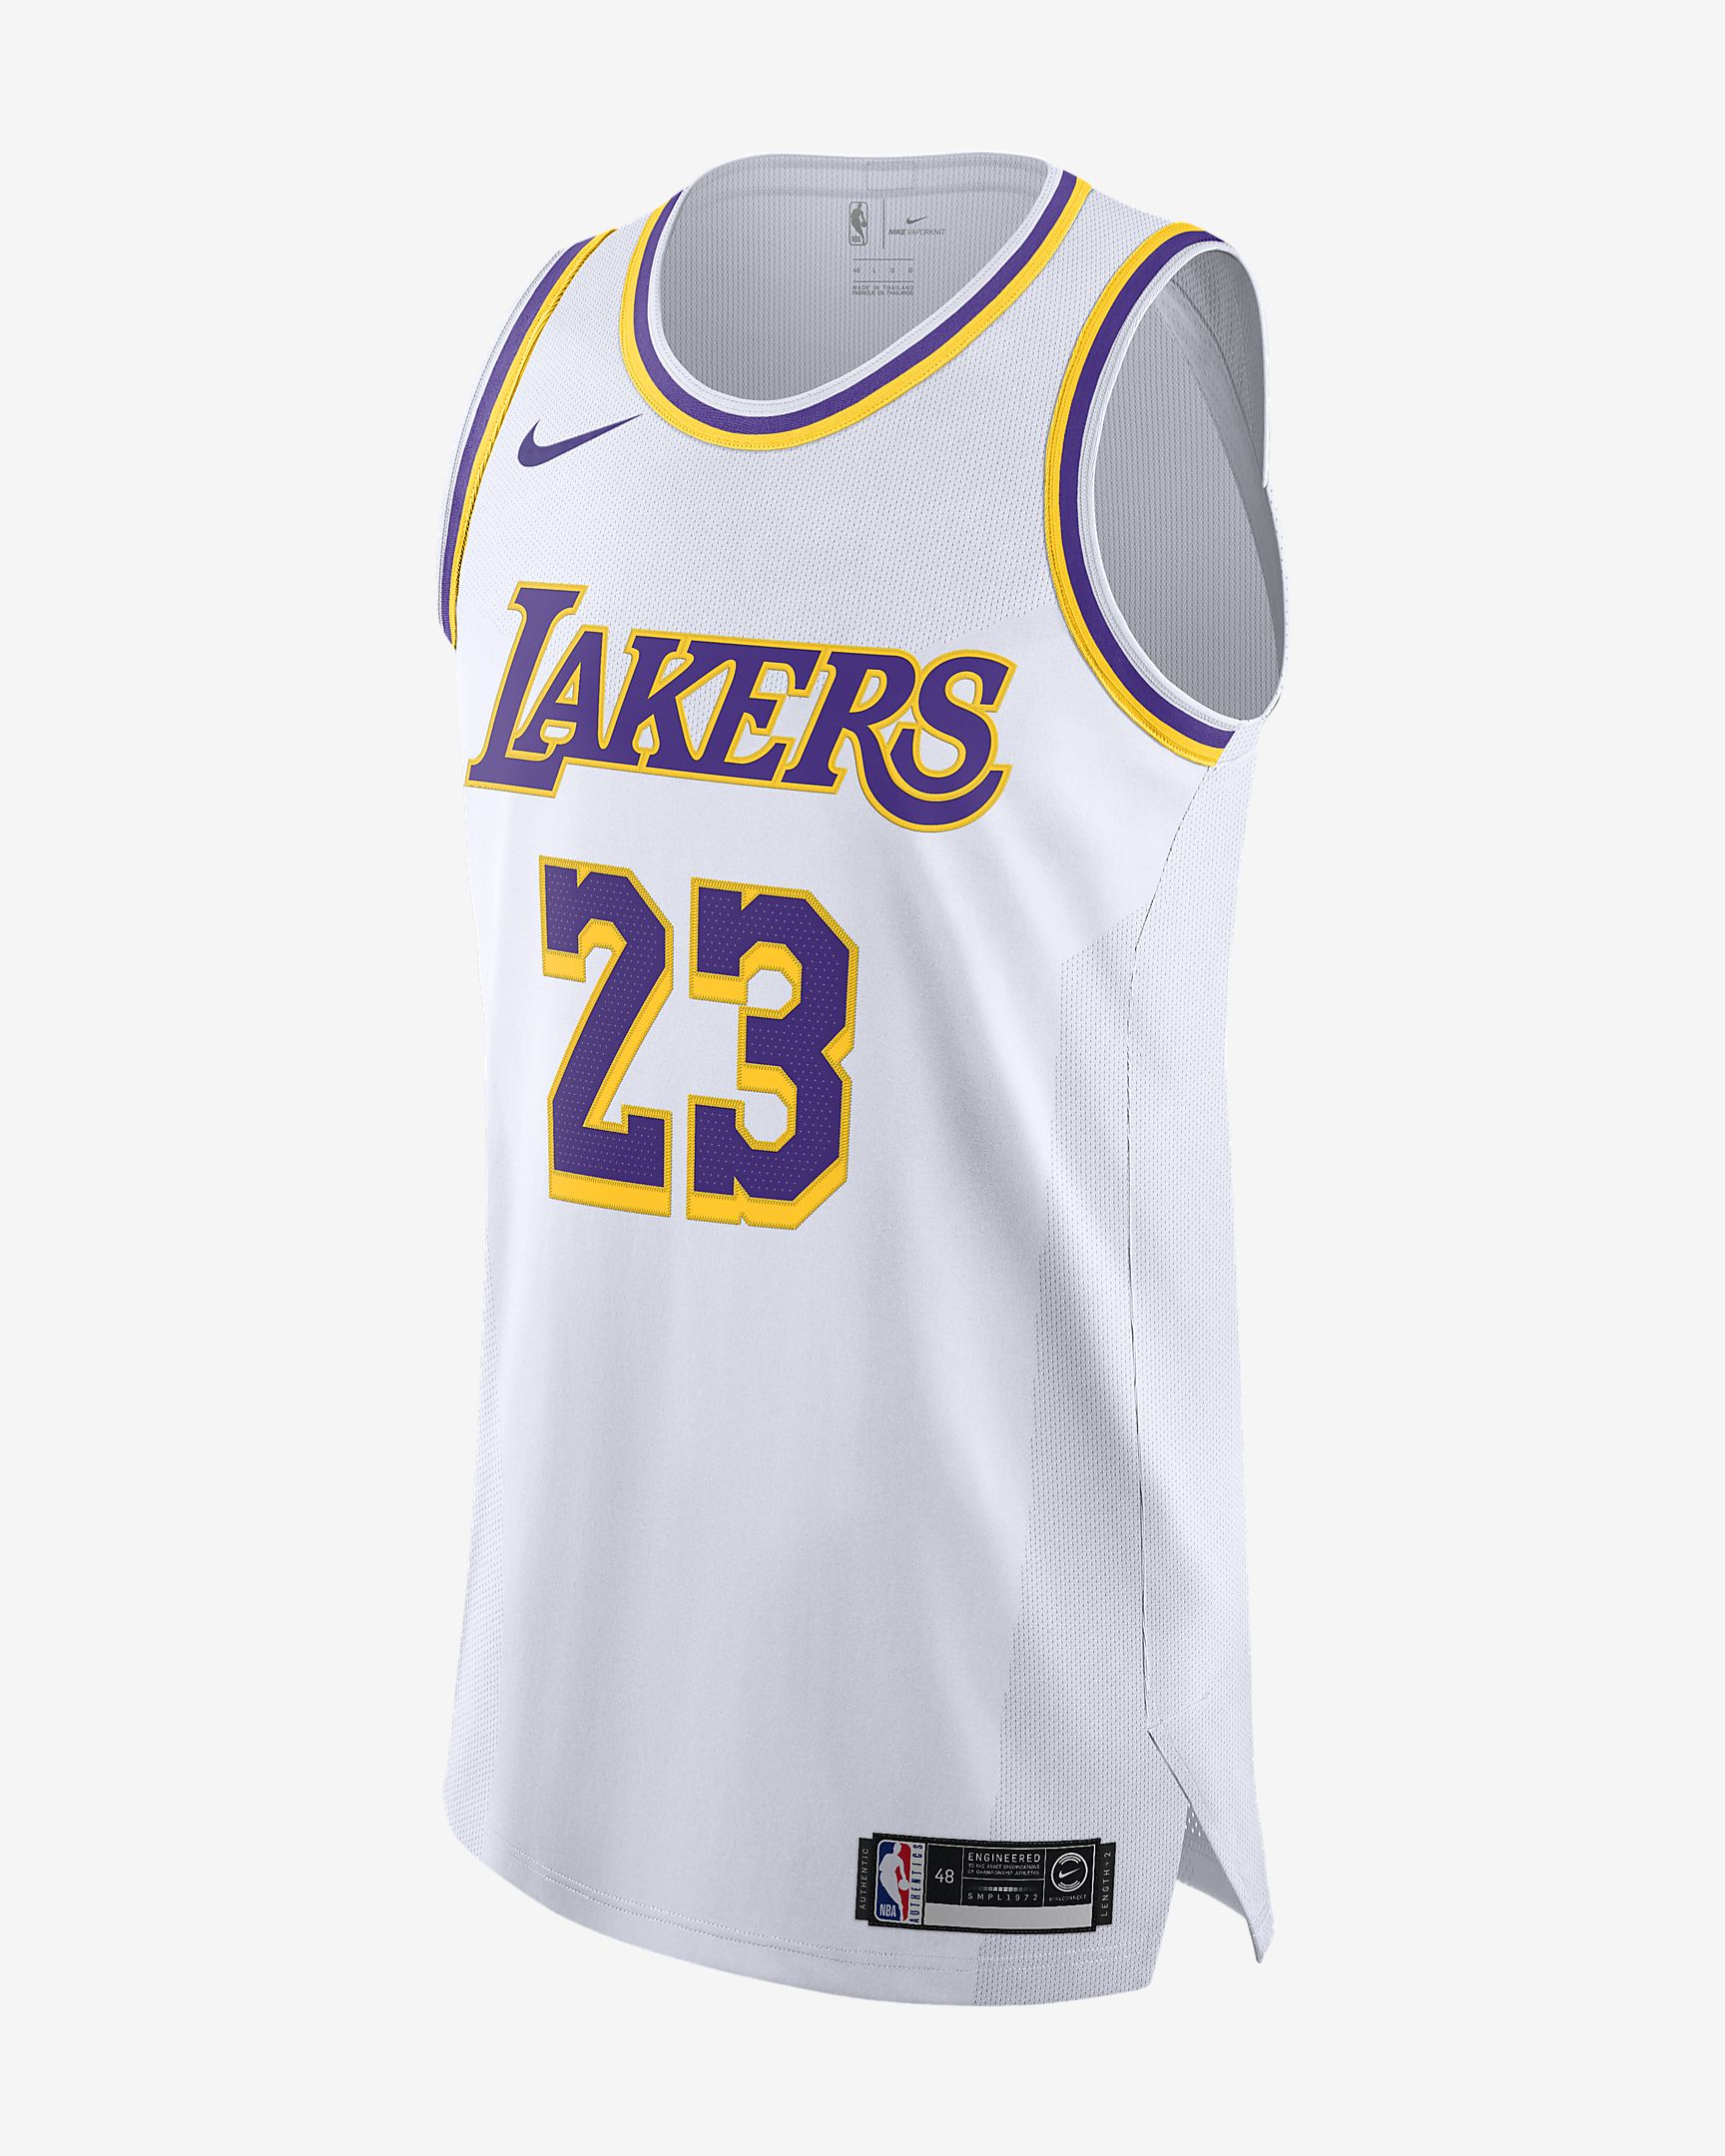 lebron-james-association-edition-authentic-los-angeles-lakers-mens-nba-connected-jersey-bw0pDM.jpg